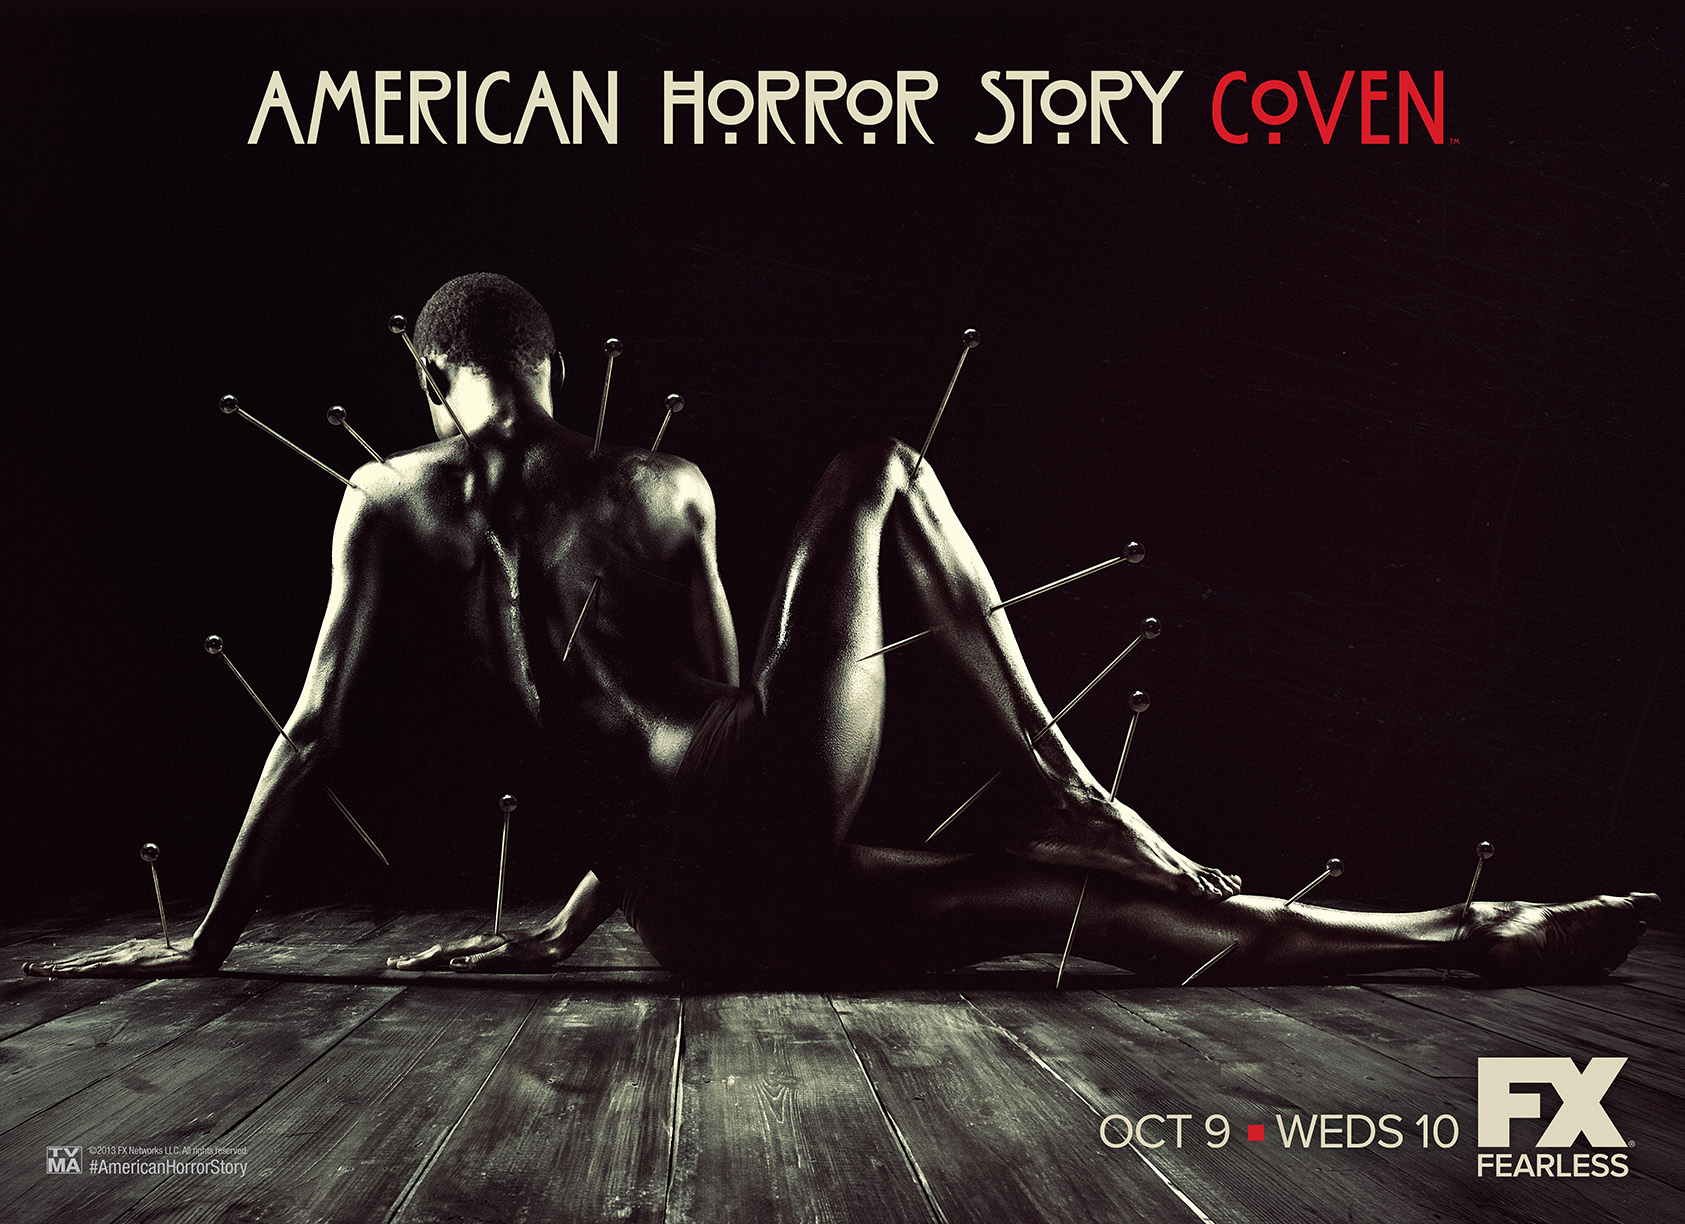 tv show, american horror story: coven lock screen backgrounds